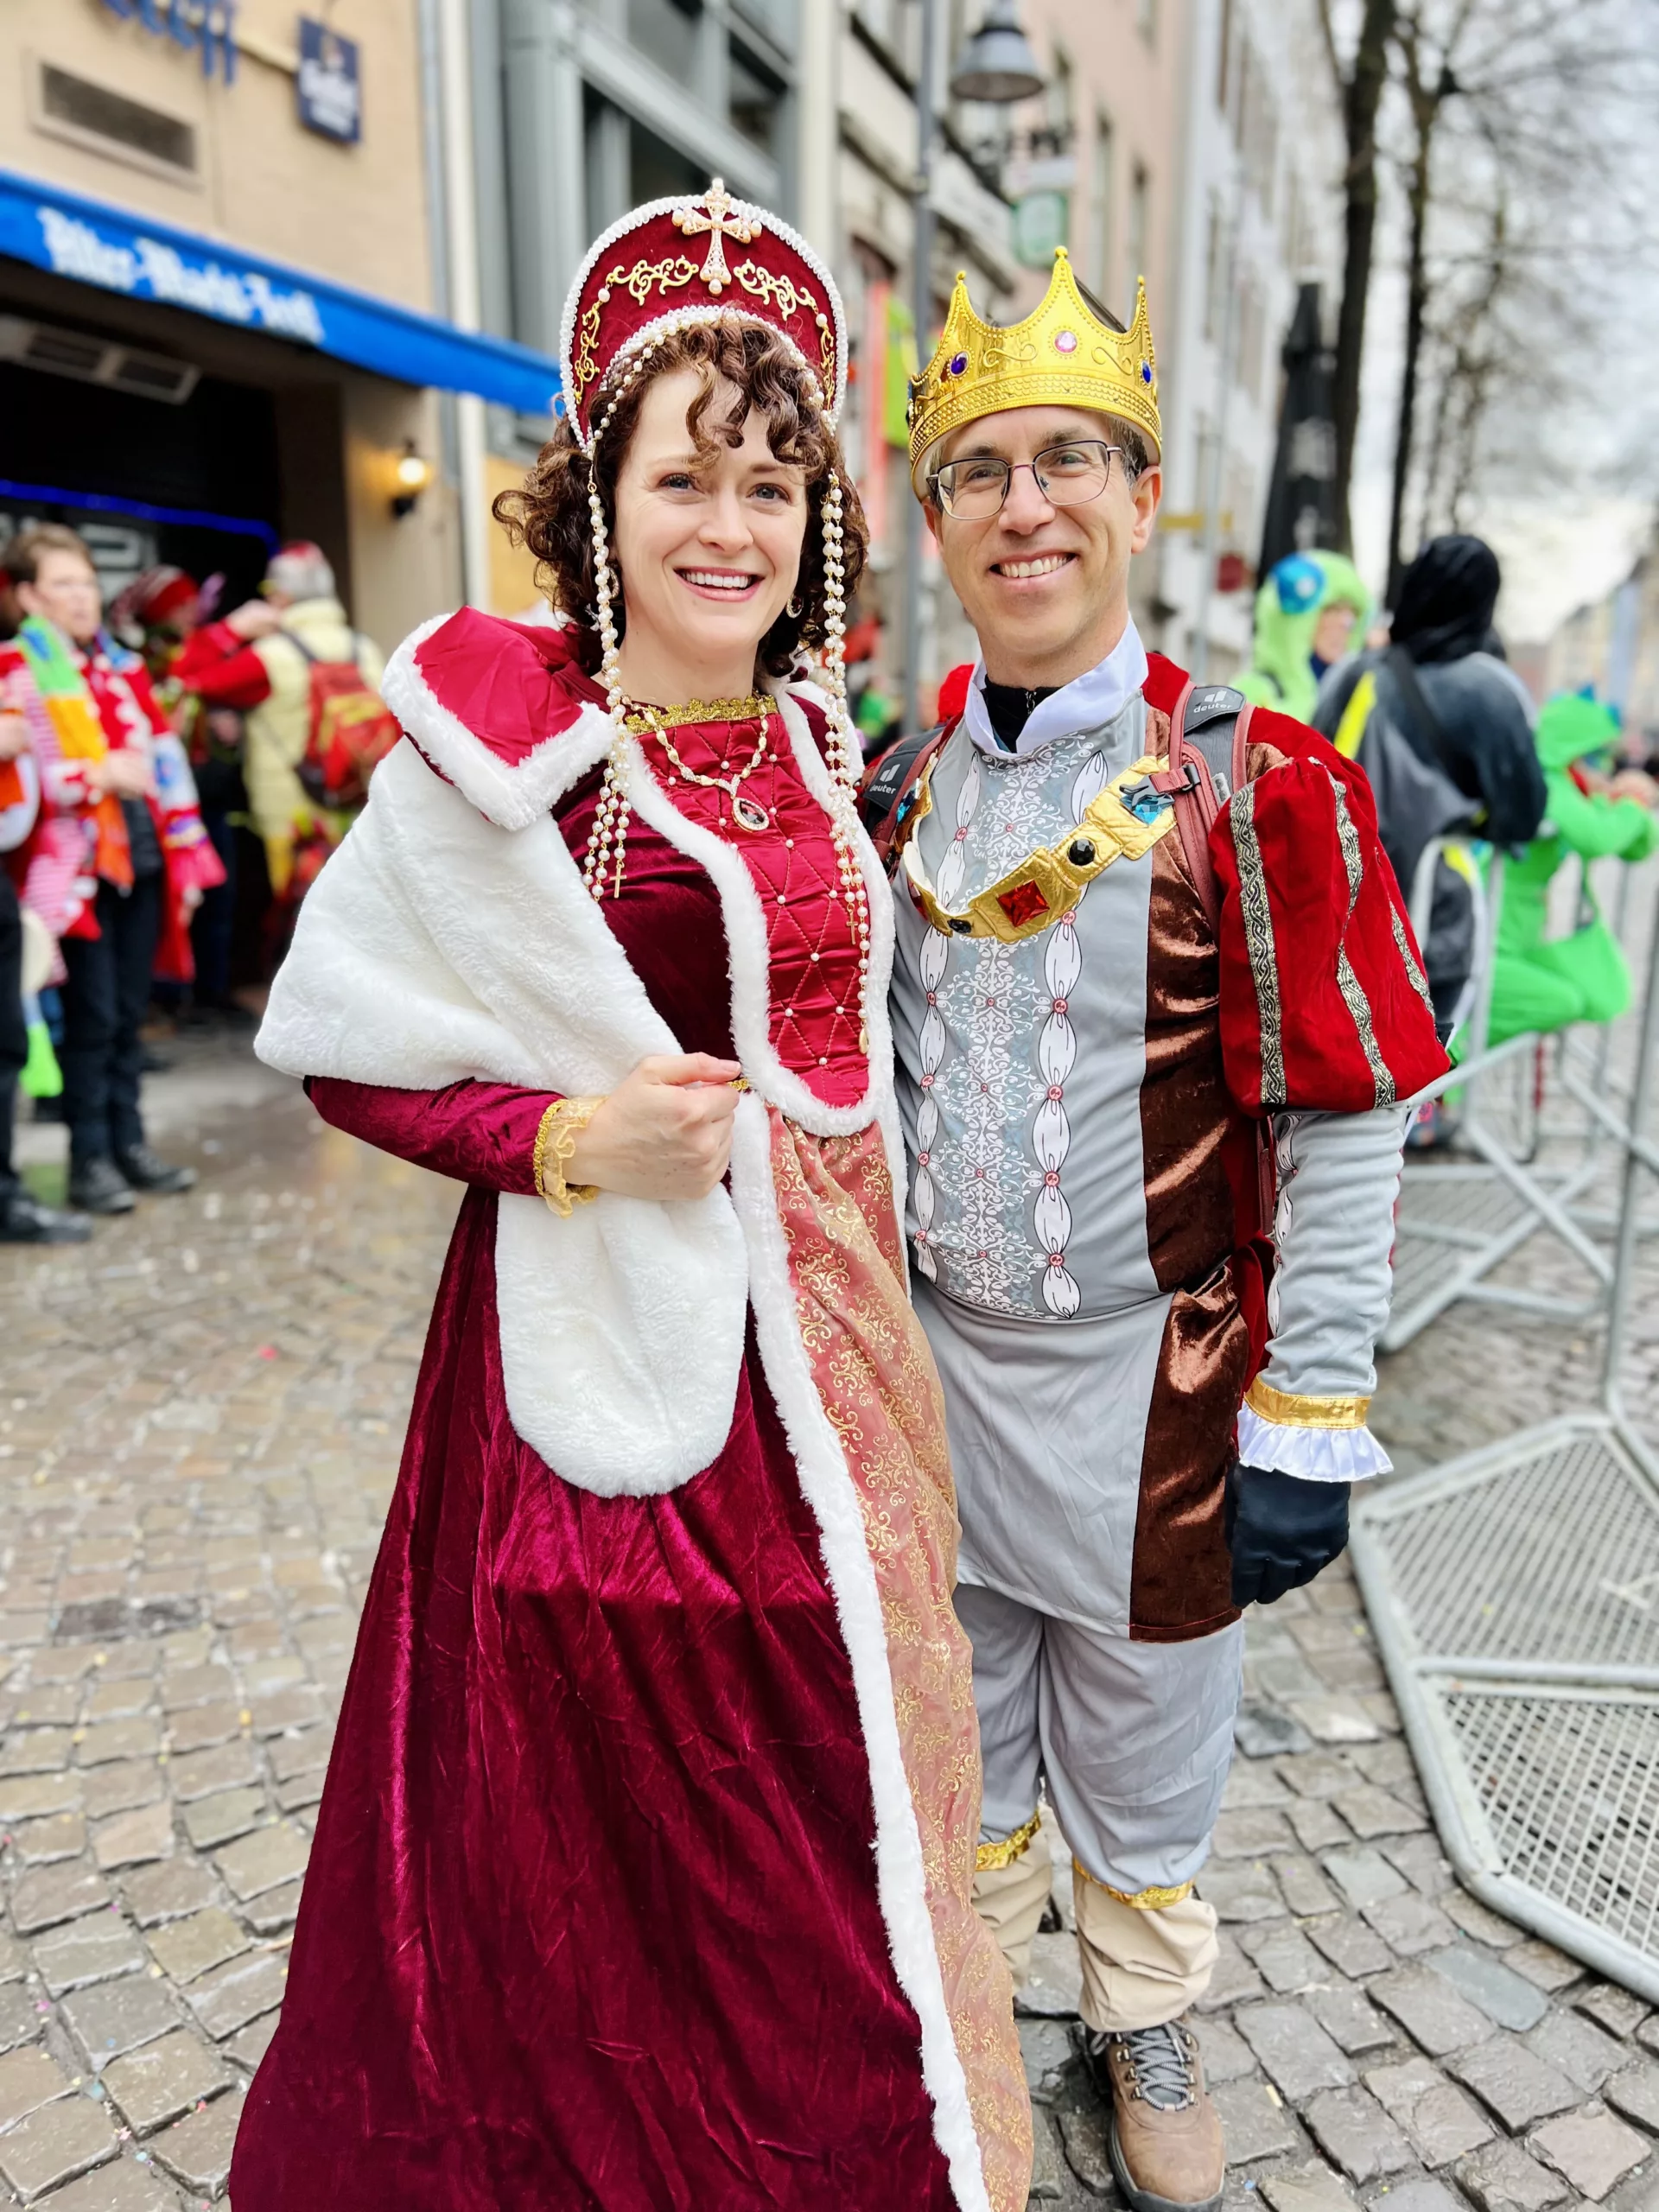 Carnival in Cologne - we went as a king and queen!